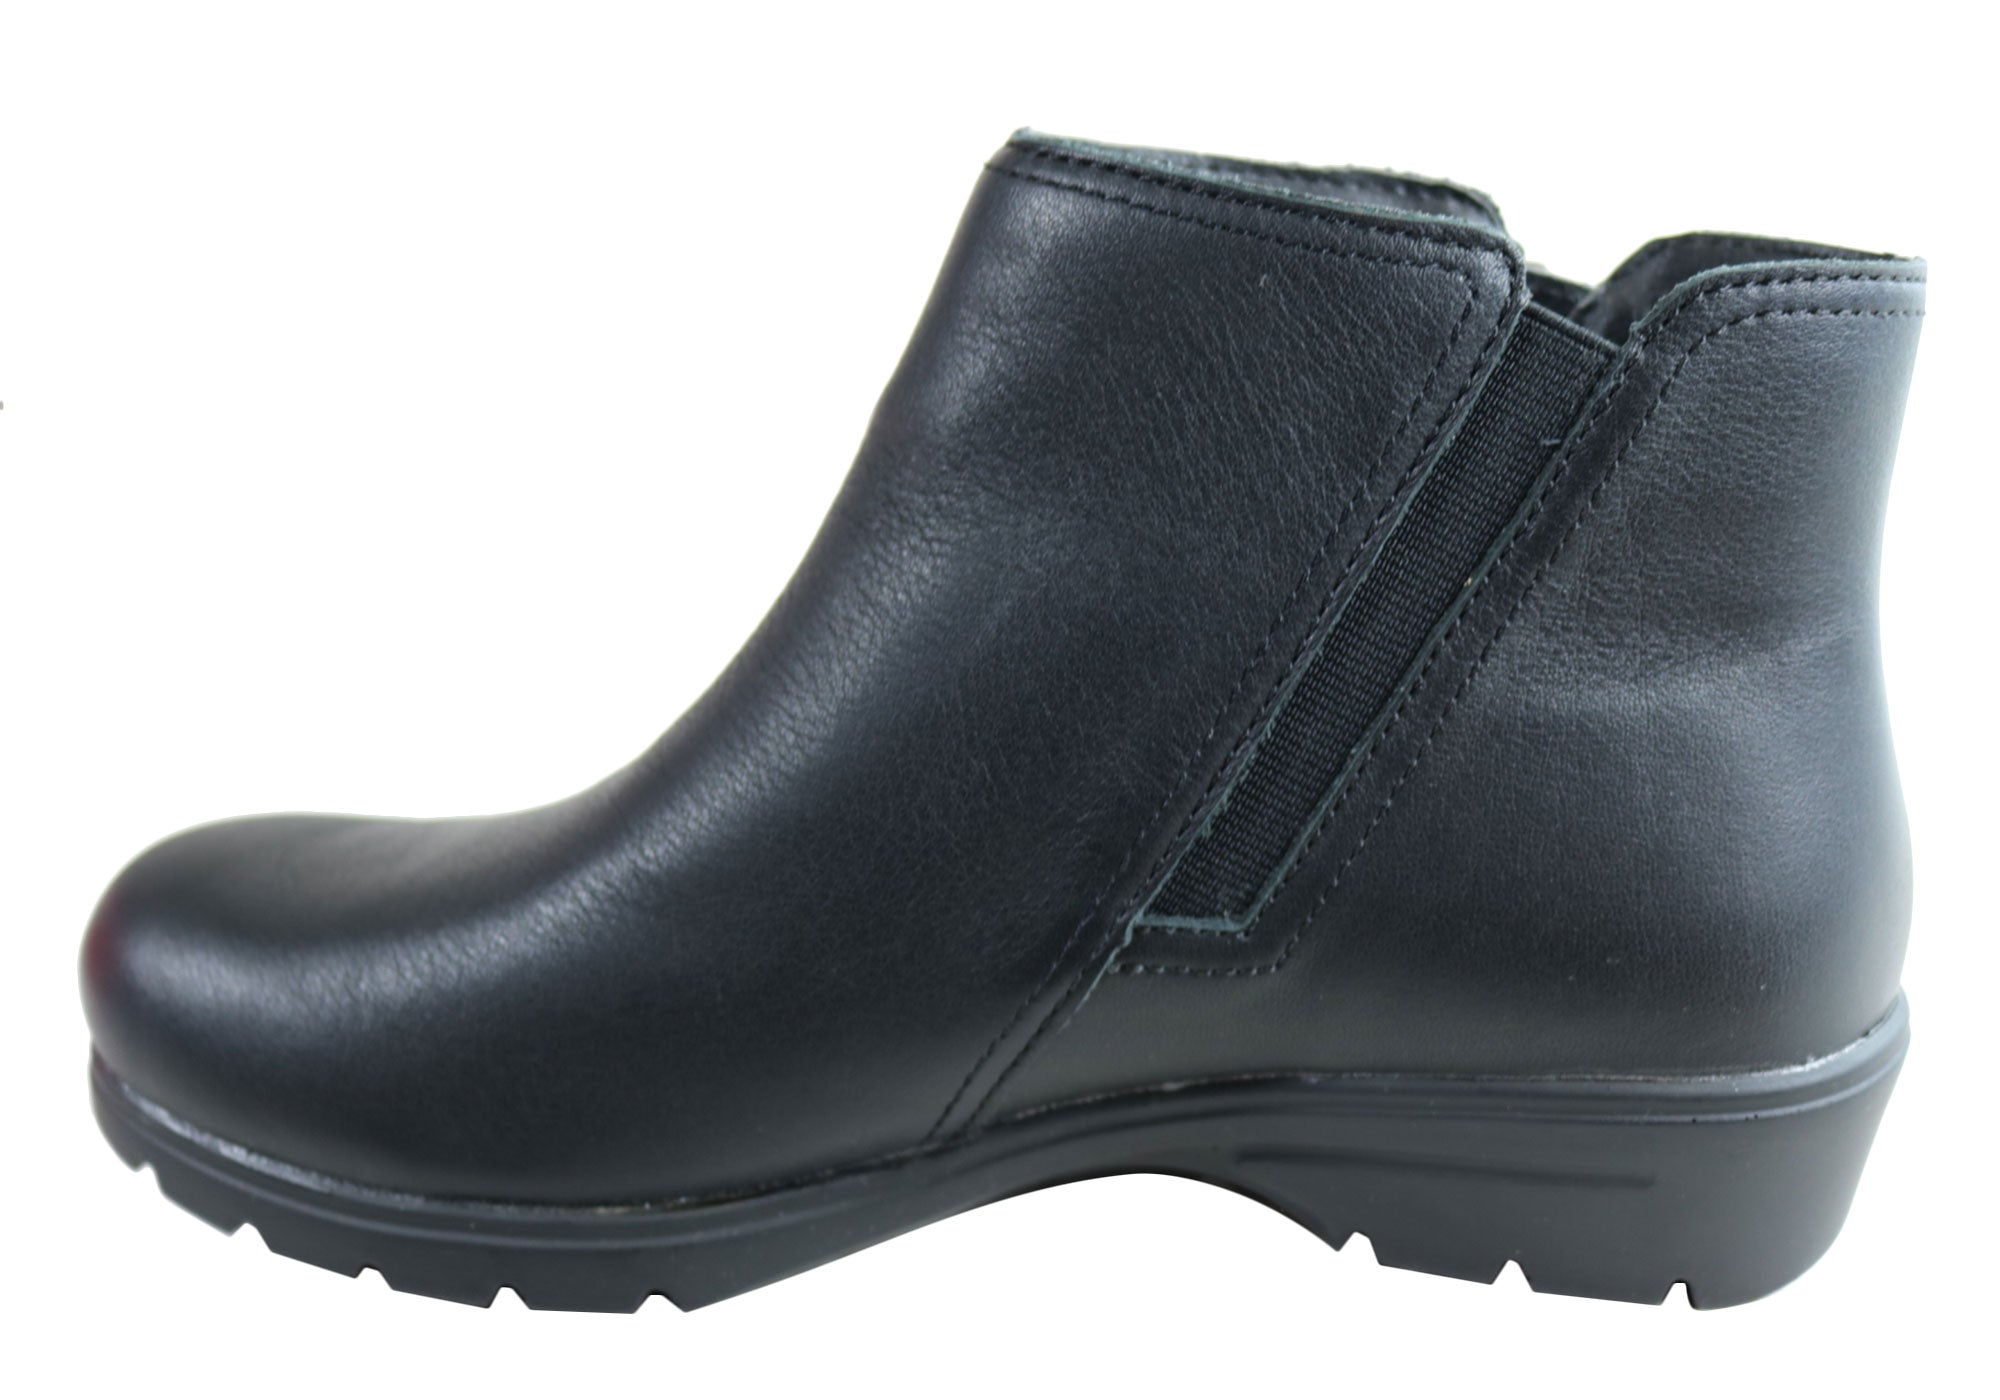 skechers boots leather